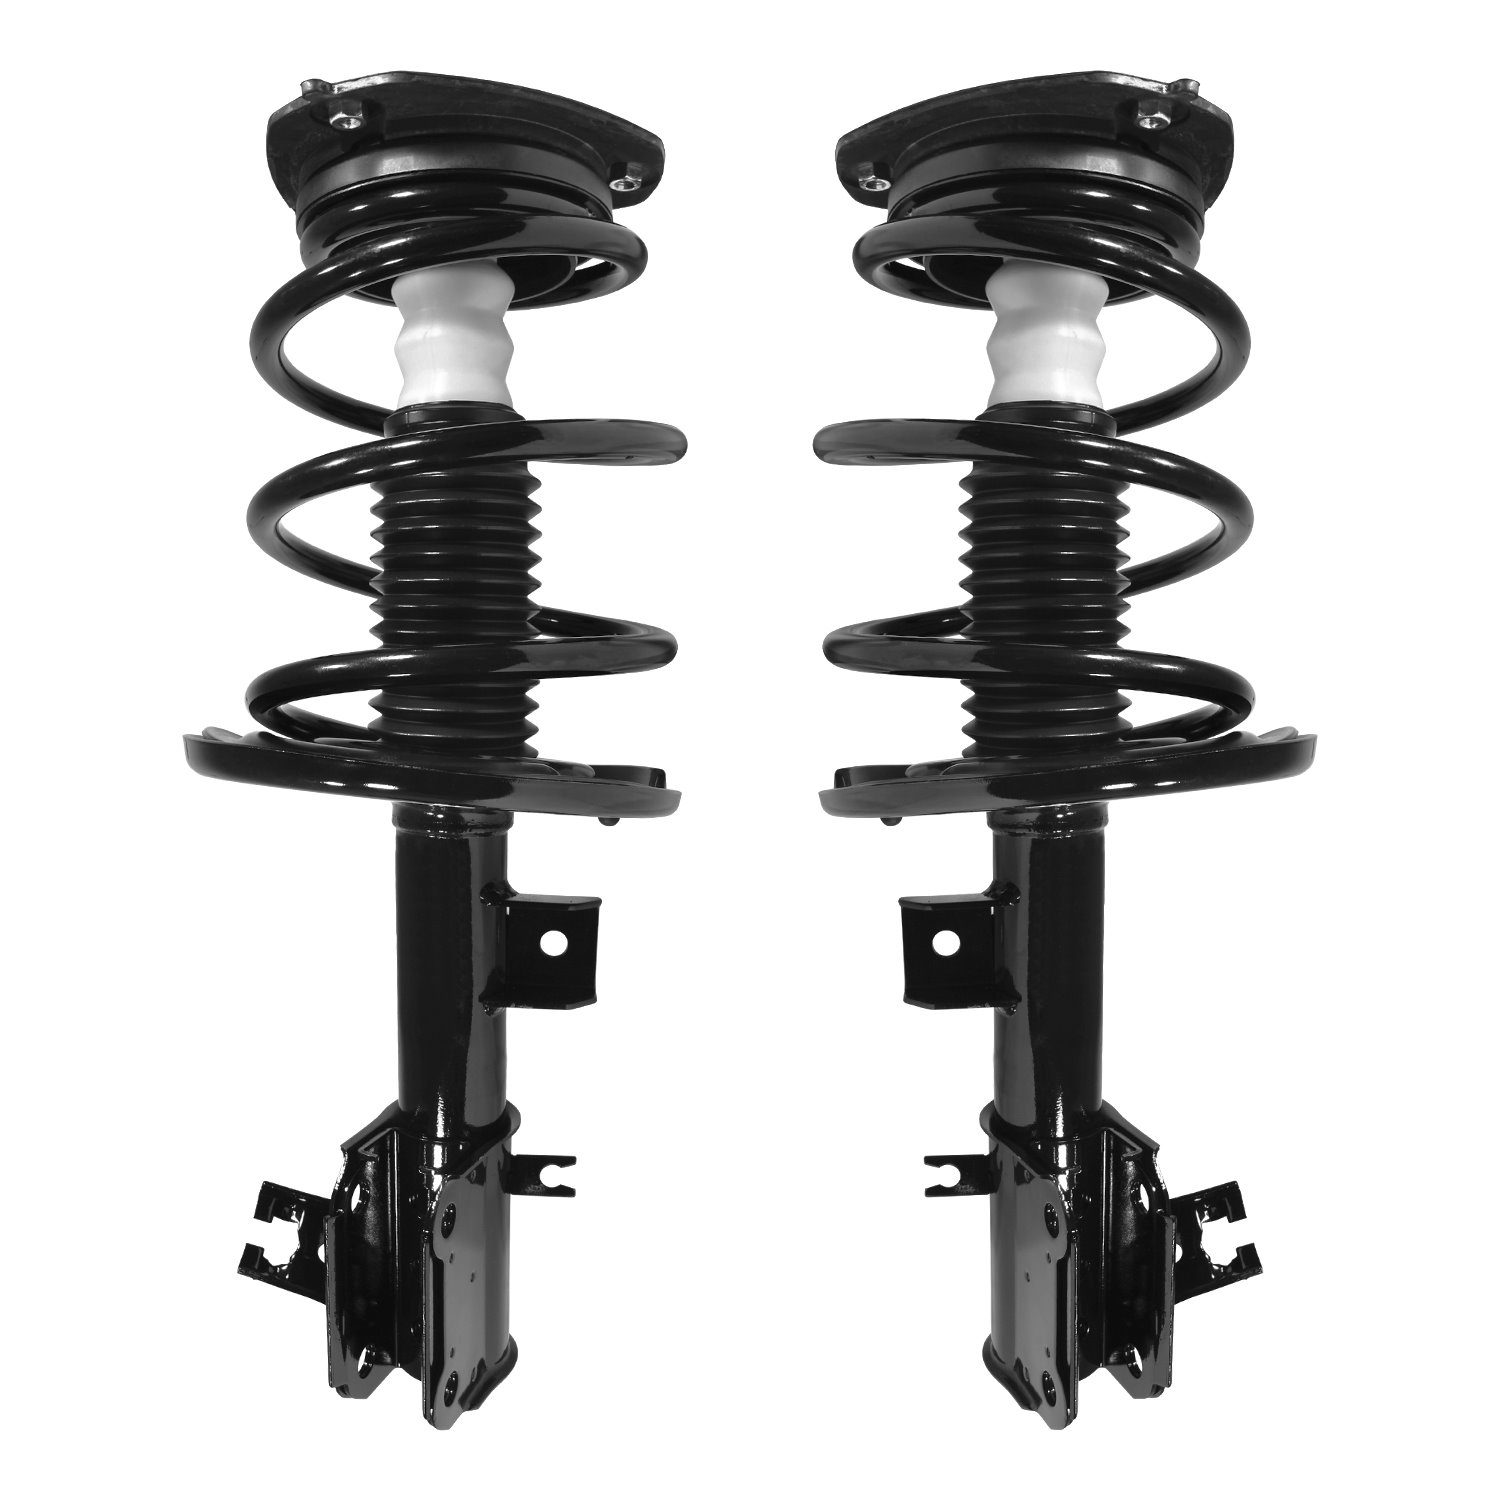 2-11335-11336-001 Suspension Strut & Coil Spring Assembly Set Fits Select Nissan Maxima